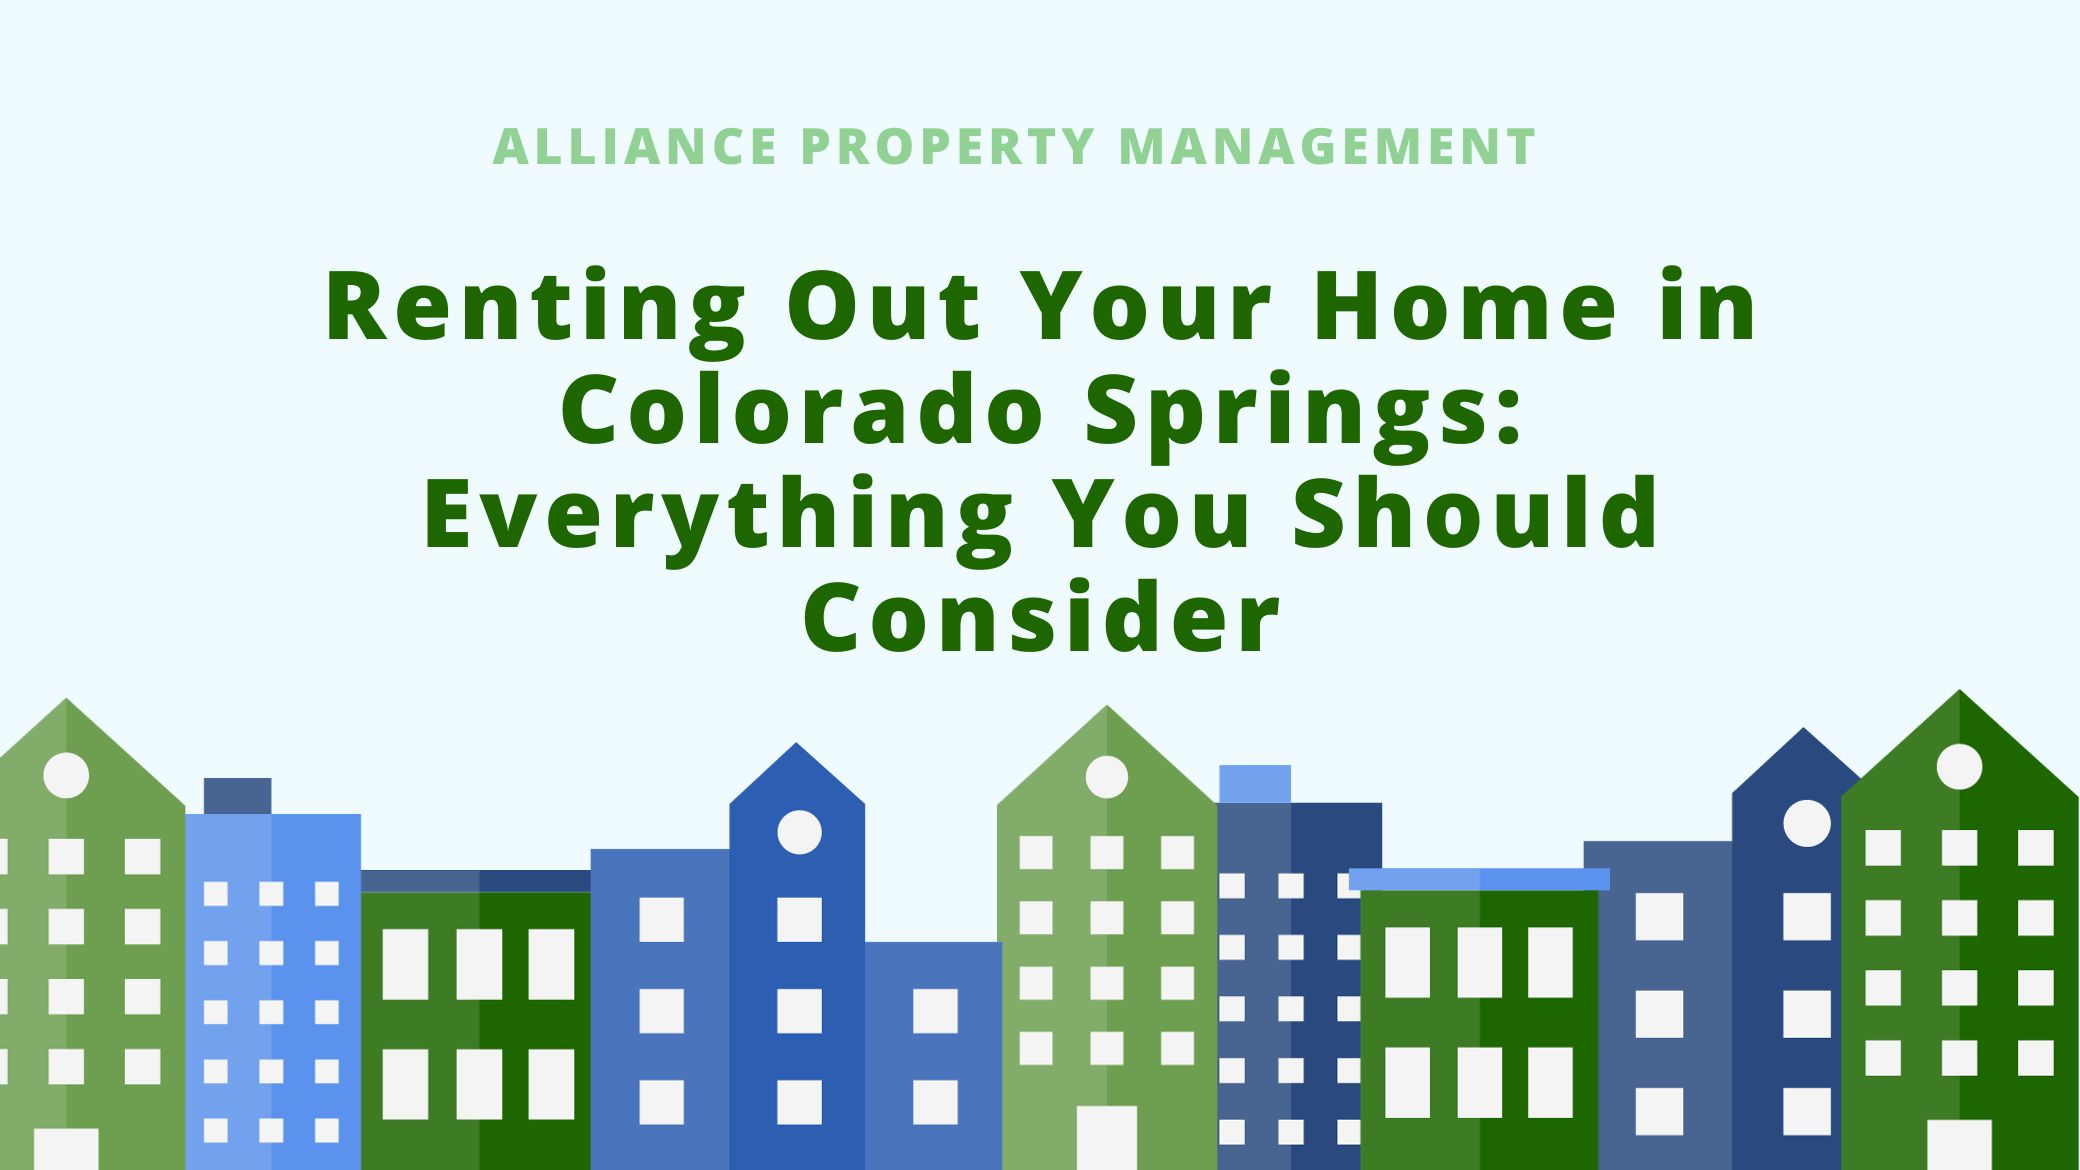 Renting Out Your Home in Colorado Springs: Everything You Should Consider